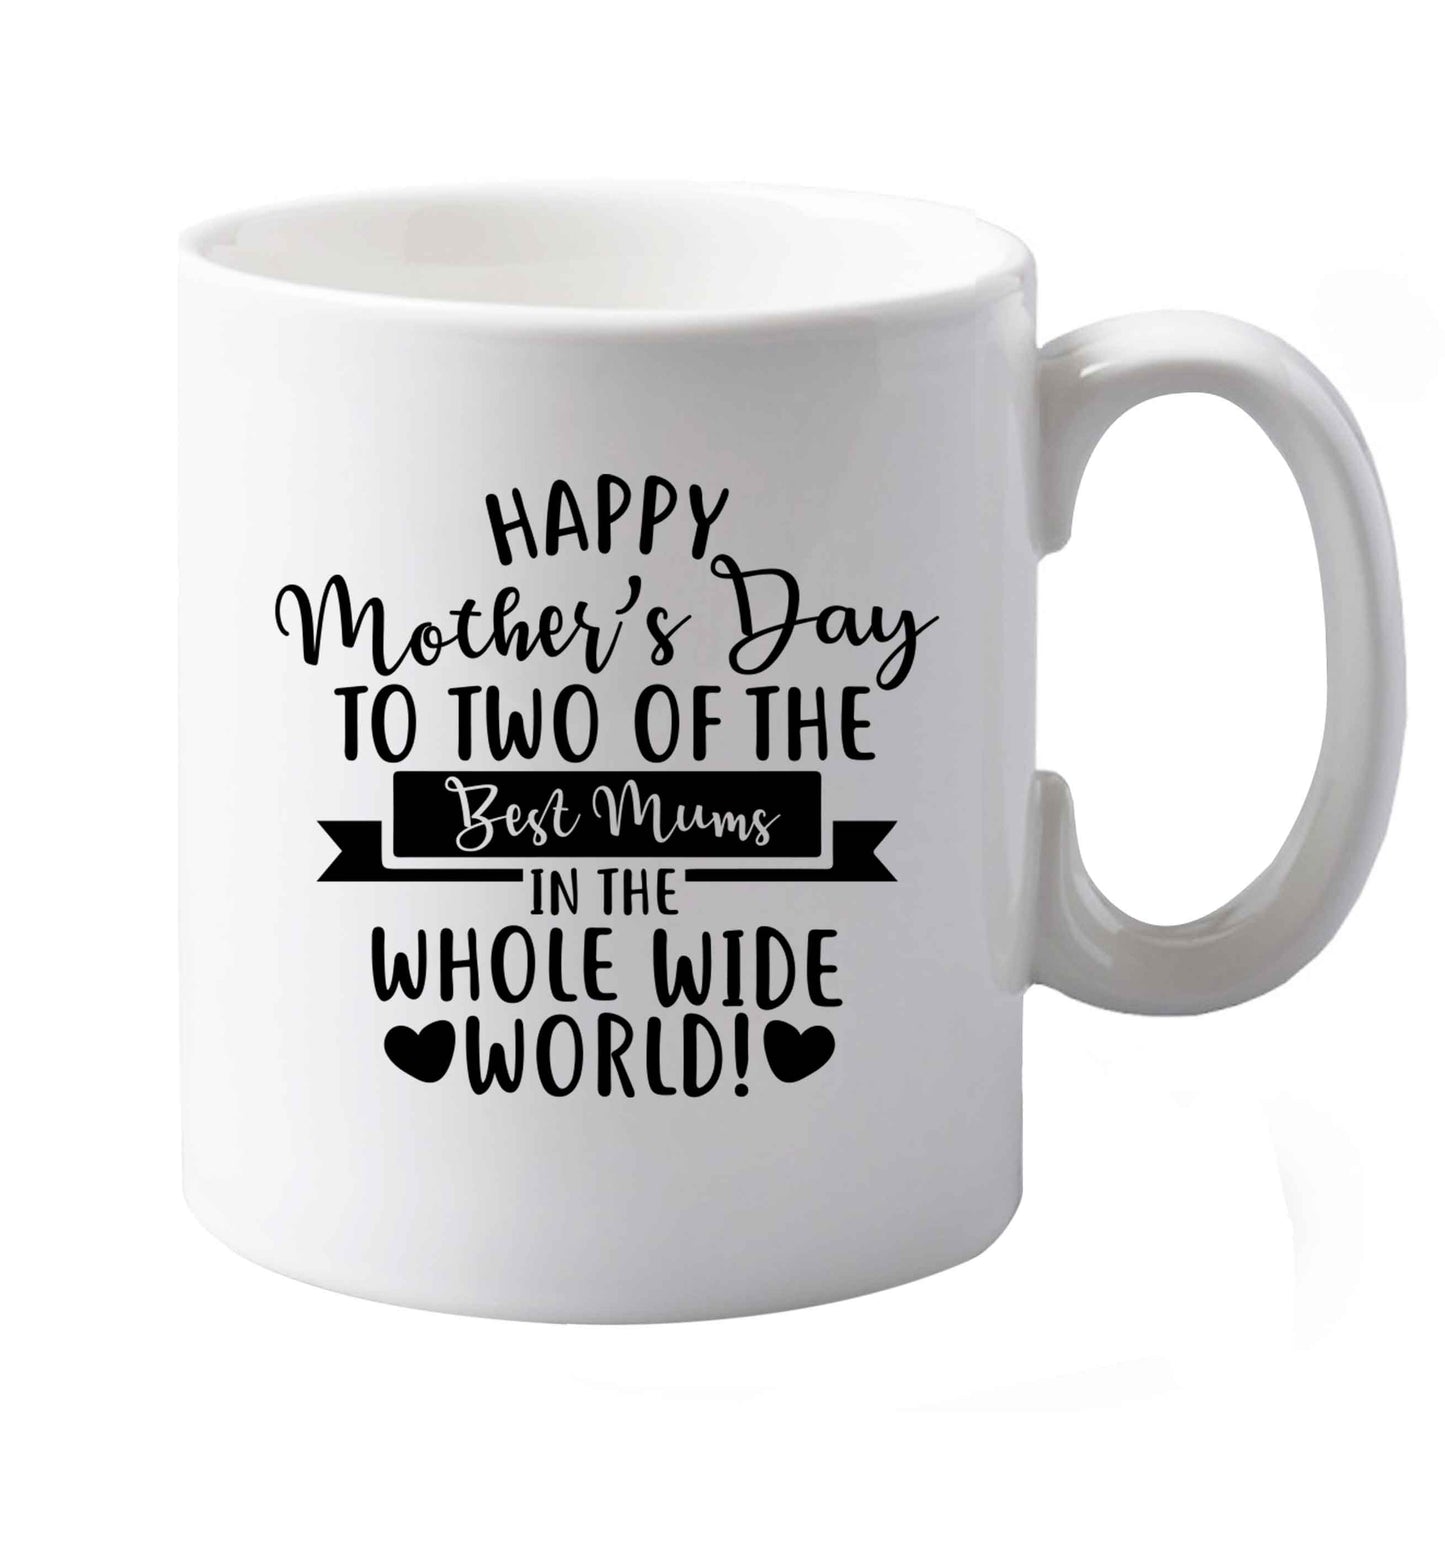 10 oz Happy mother's day to two of the best mums in the whole wide world ceramic mug both sides